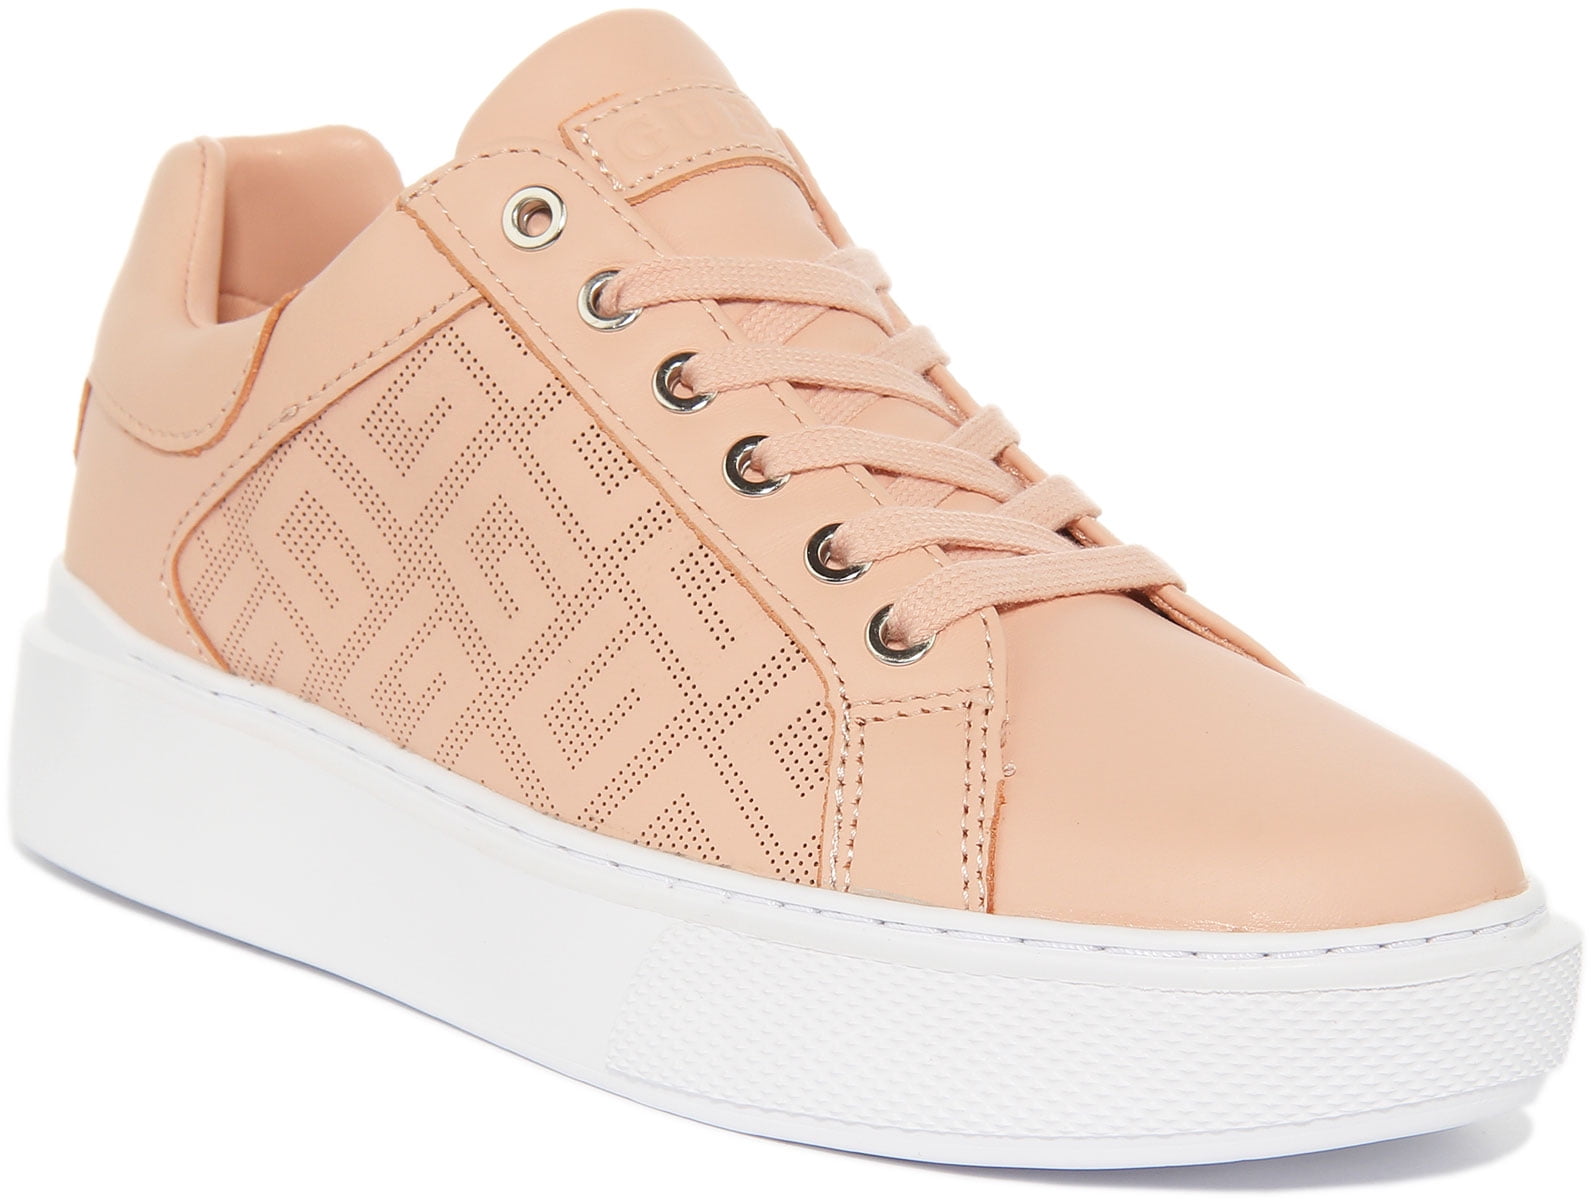 Guess Bevlee Stud Women's Low Top Lace Up Synthetic Sneakers In Beige Size  10 - Walmart.com